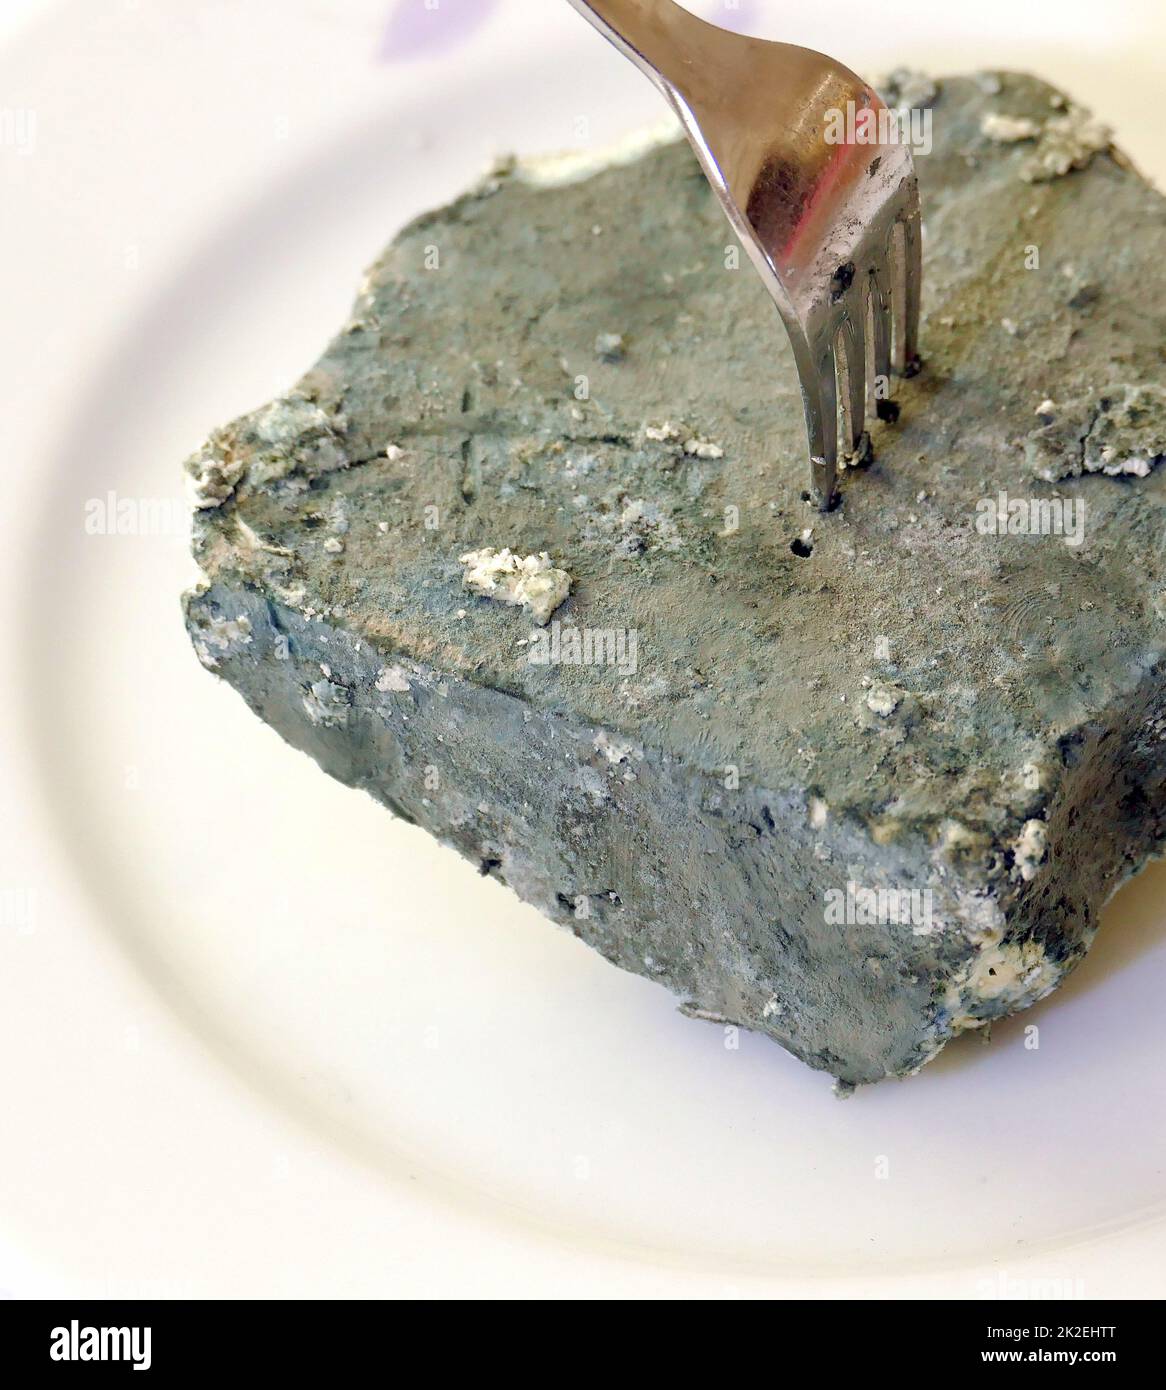 moldy cheese,close-up very moldy cheese,penicillin raw material cheese mold Stock Photo